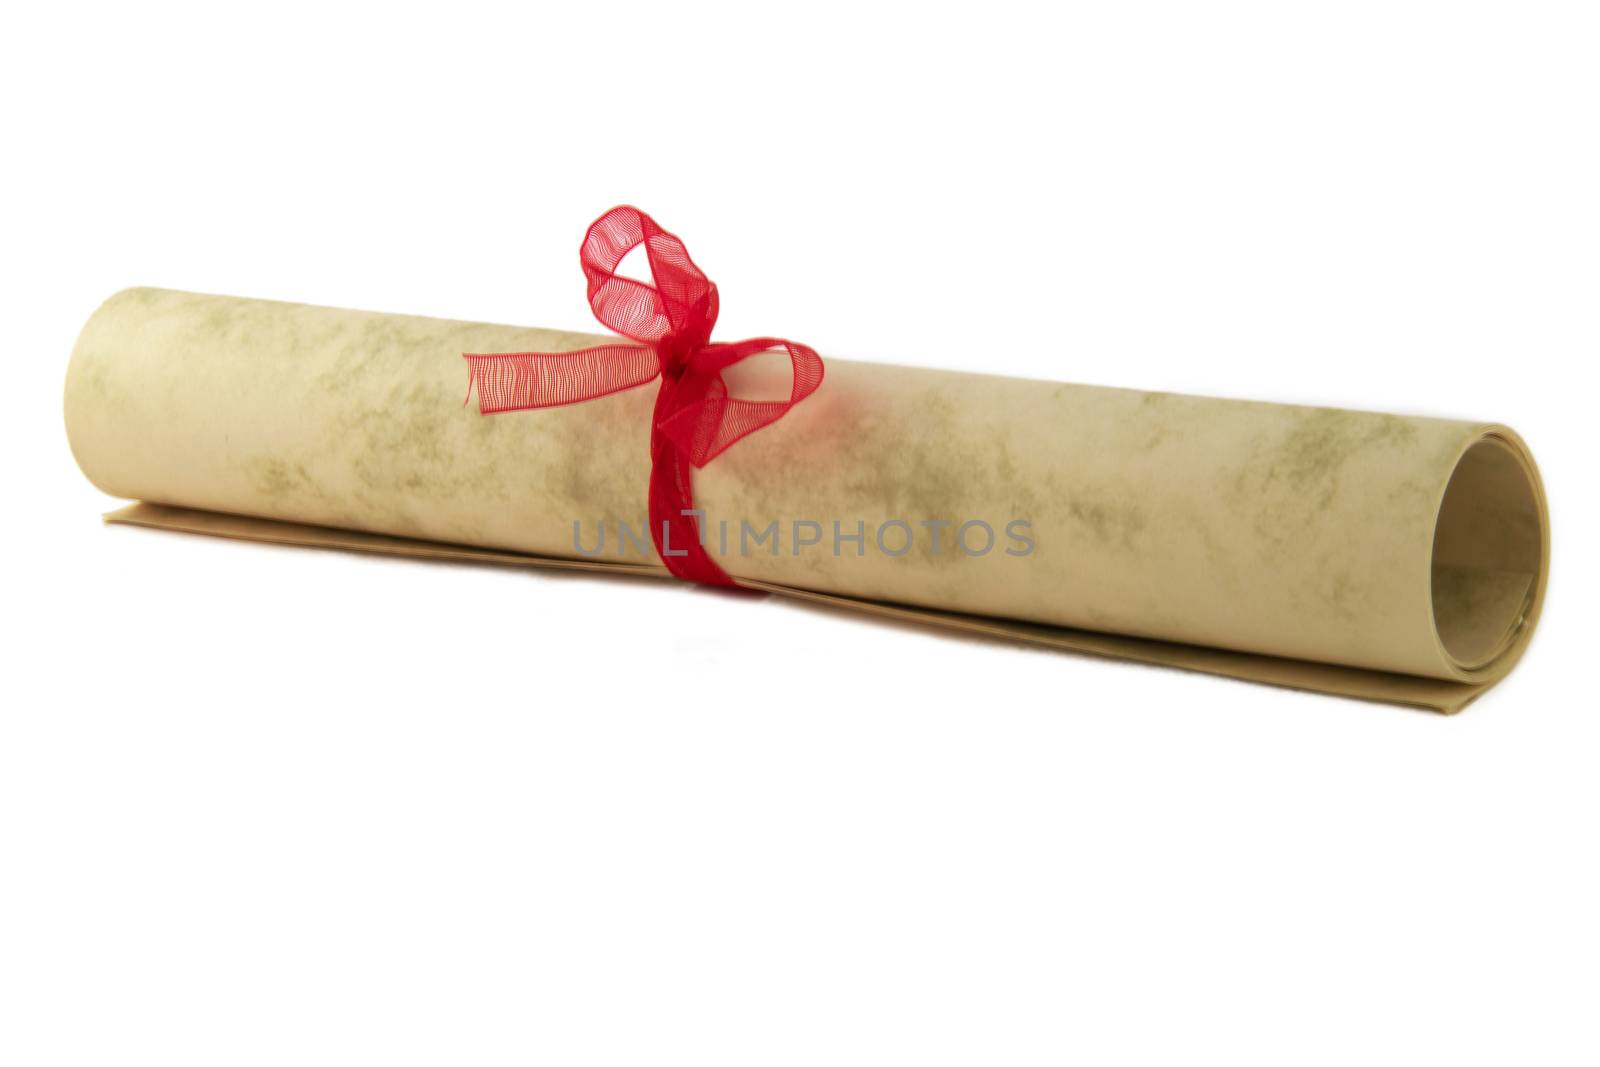 Certificate paper scroll isolated on white with bow. diploma or award document. Graduation, success achievement parchment with ribbon. College education degree rolled declaration tied with red knot.